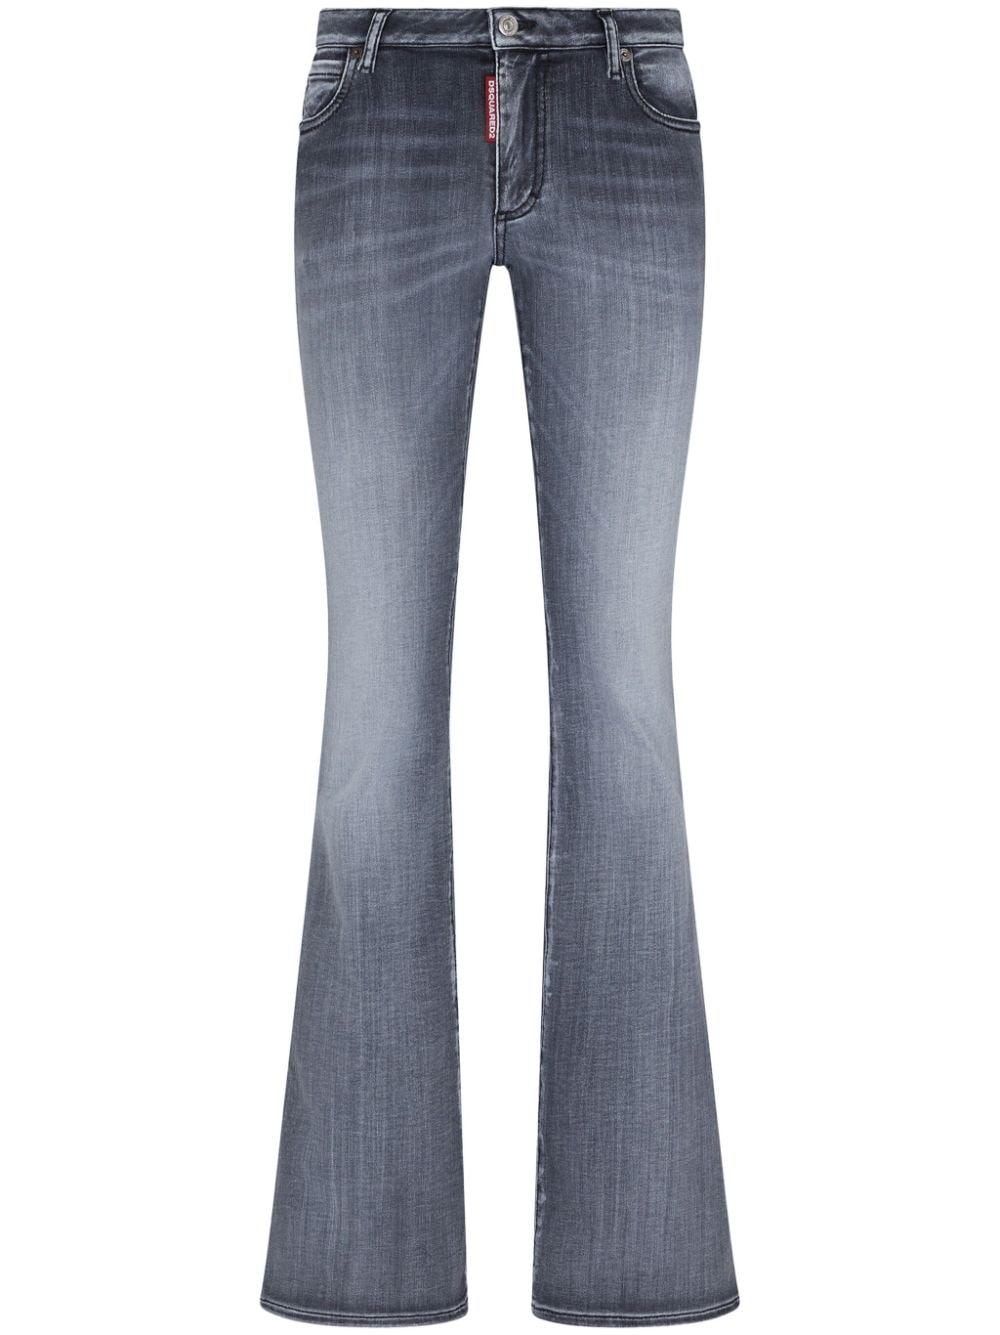 Dsquared2 faded flared jeans - Grey von Dsquared2